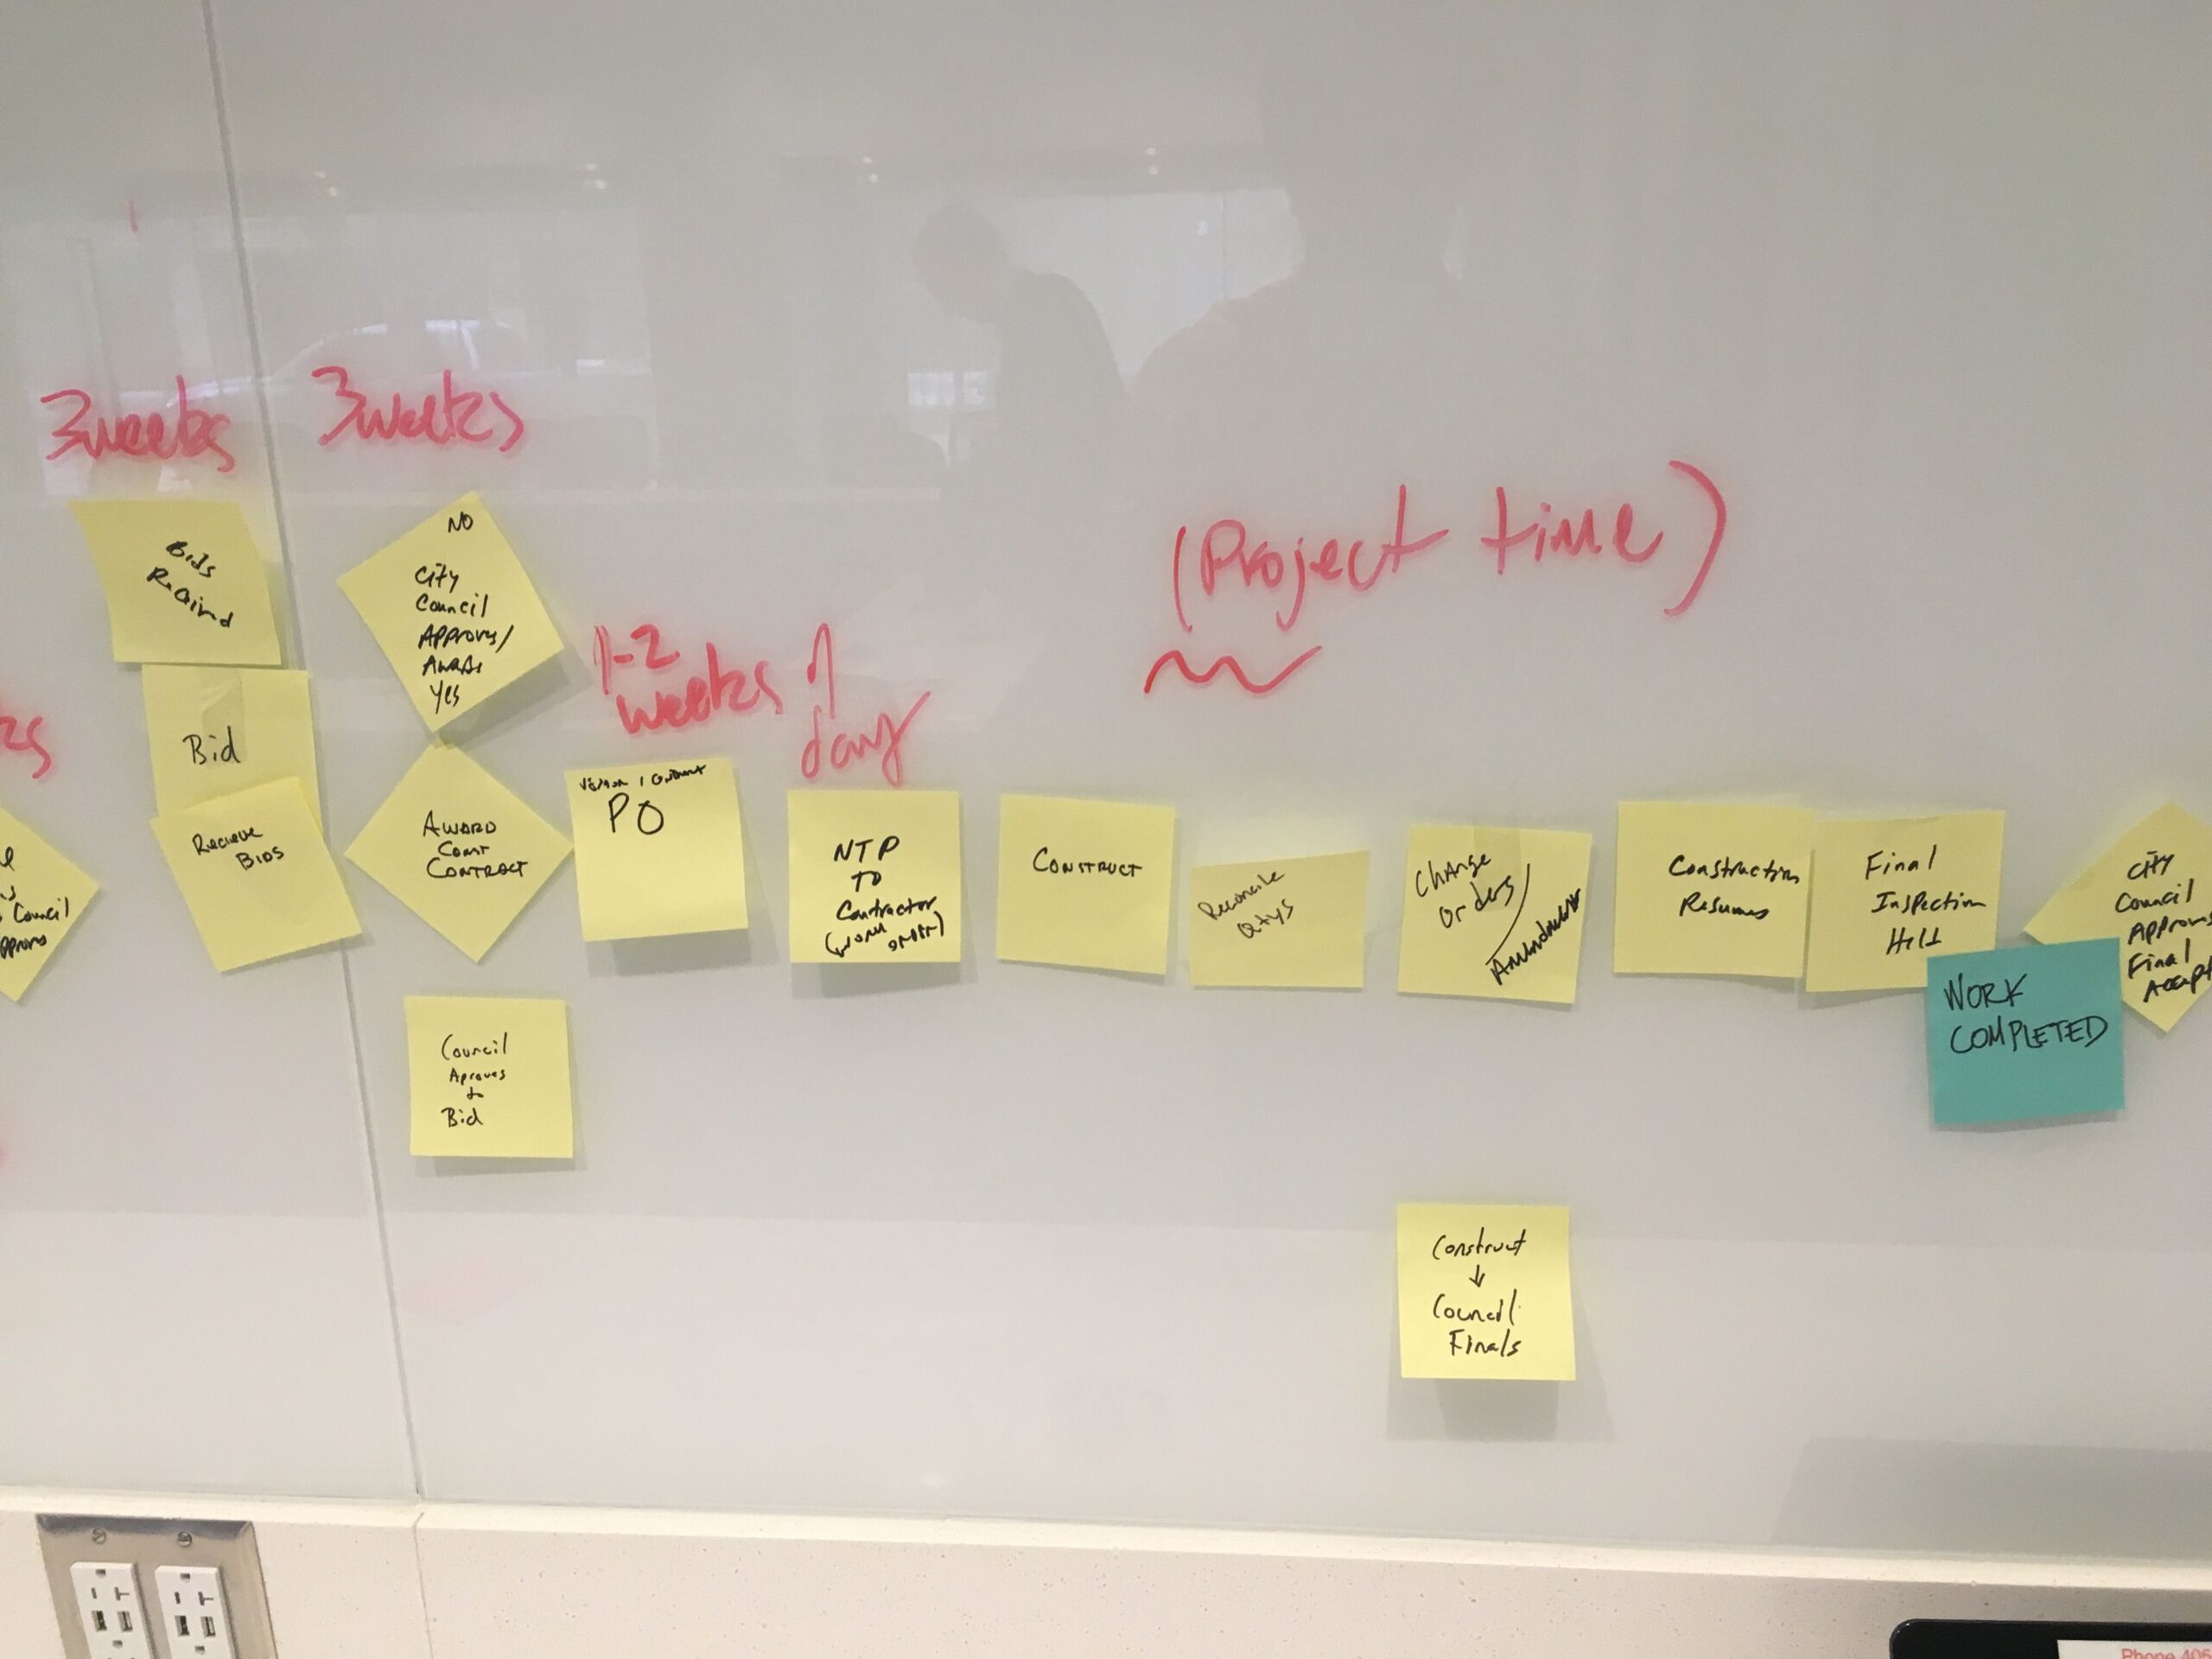 Image of process map with post-it notes